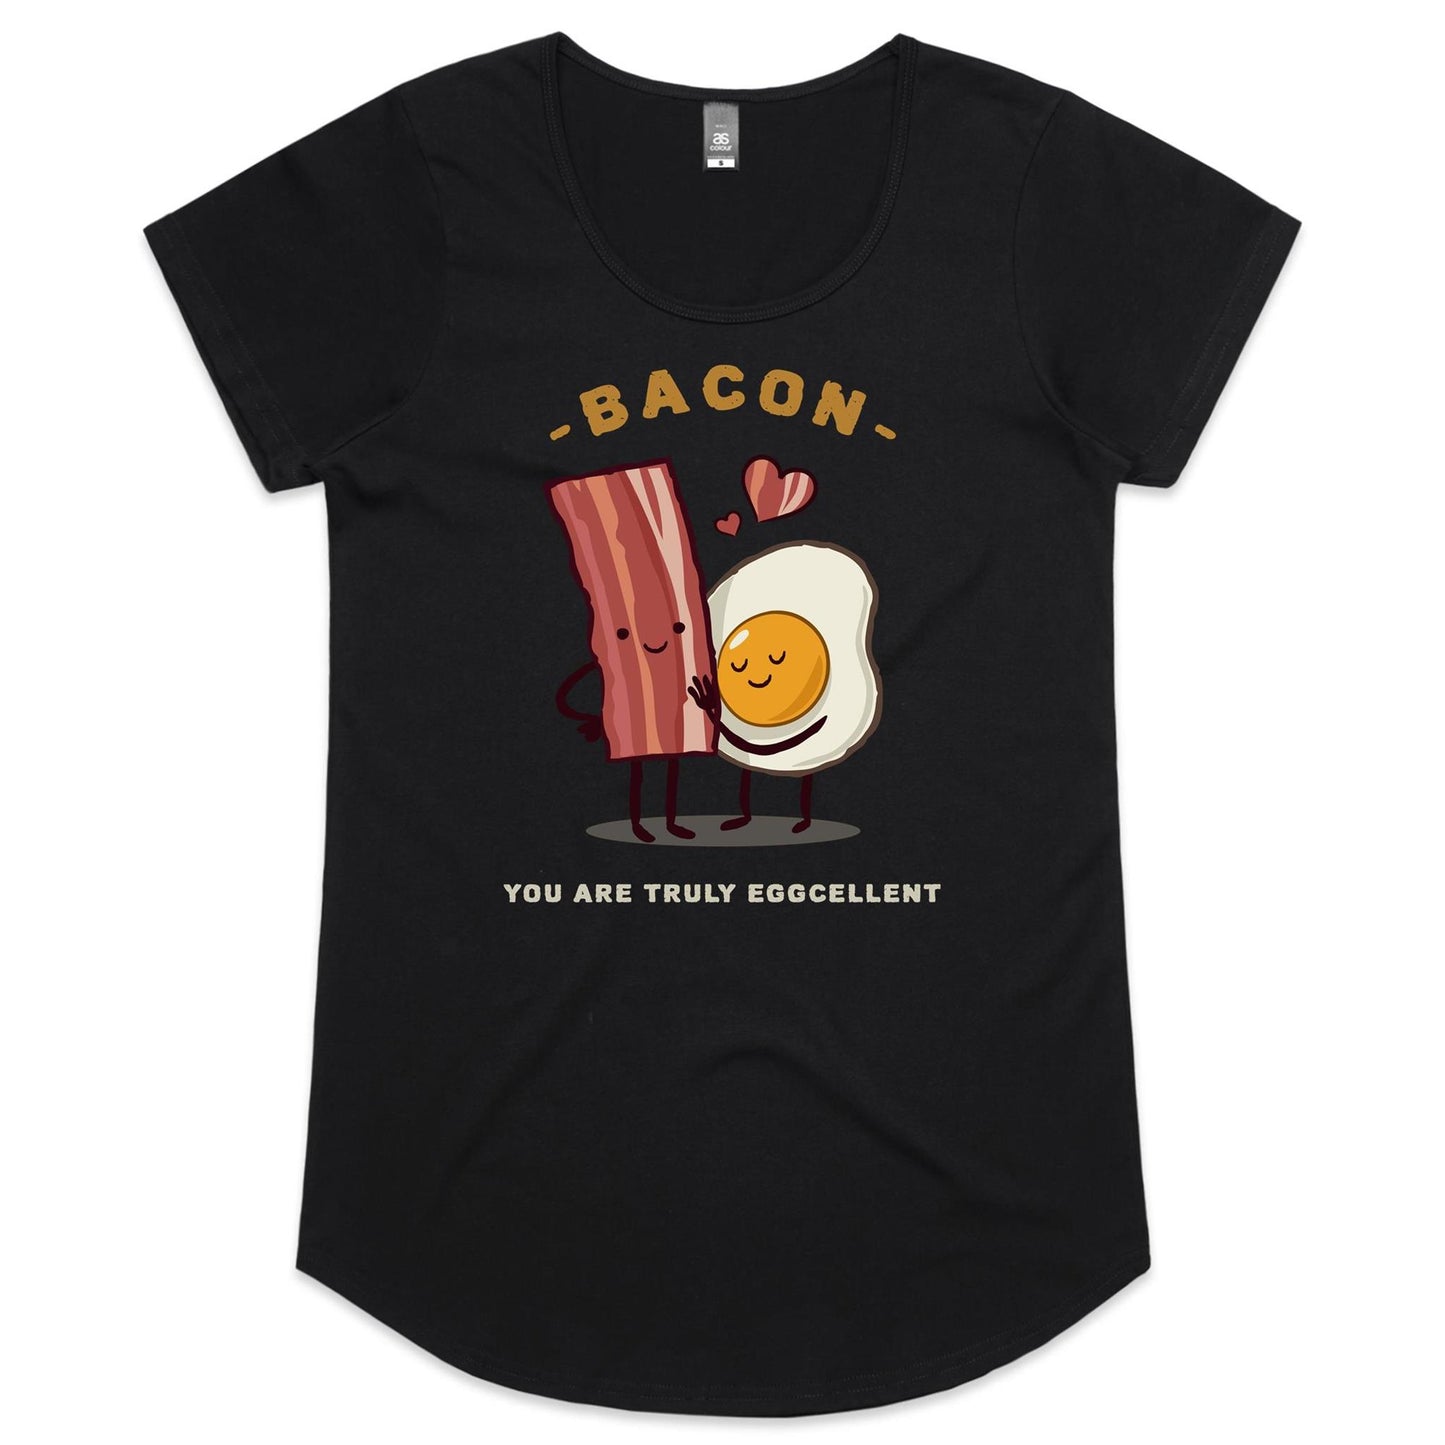 Bacon, You Are Truly Eggcellent - Womens Scoop Neck T-Shirt Black Womens Scoop Neck T-shirt Food